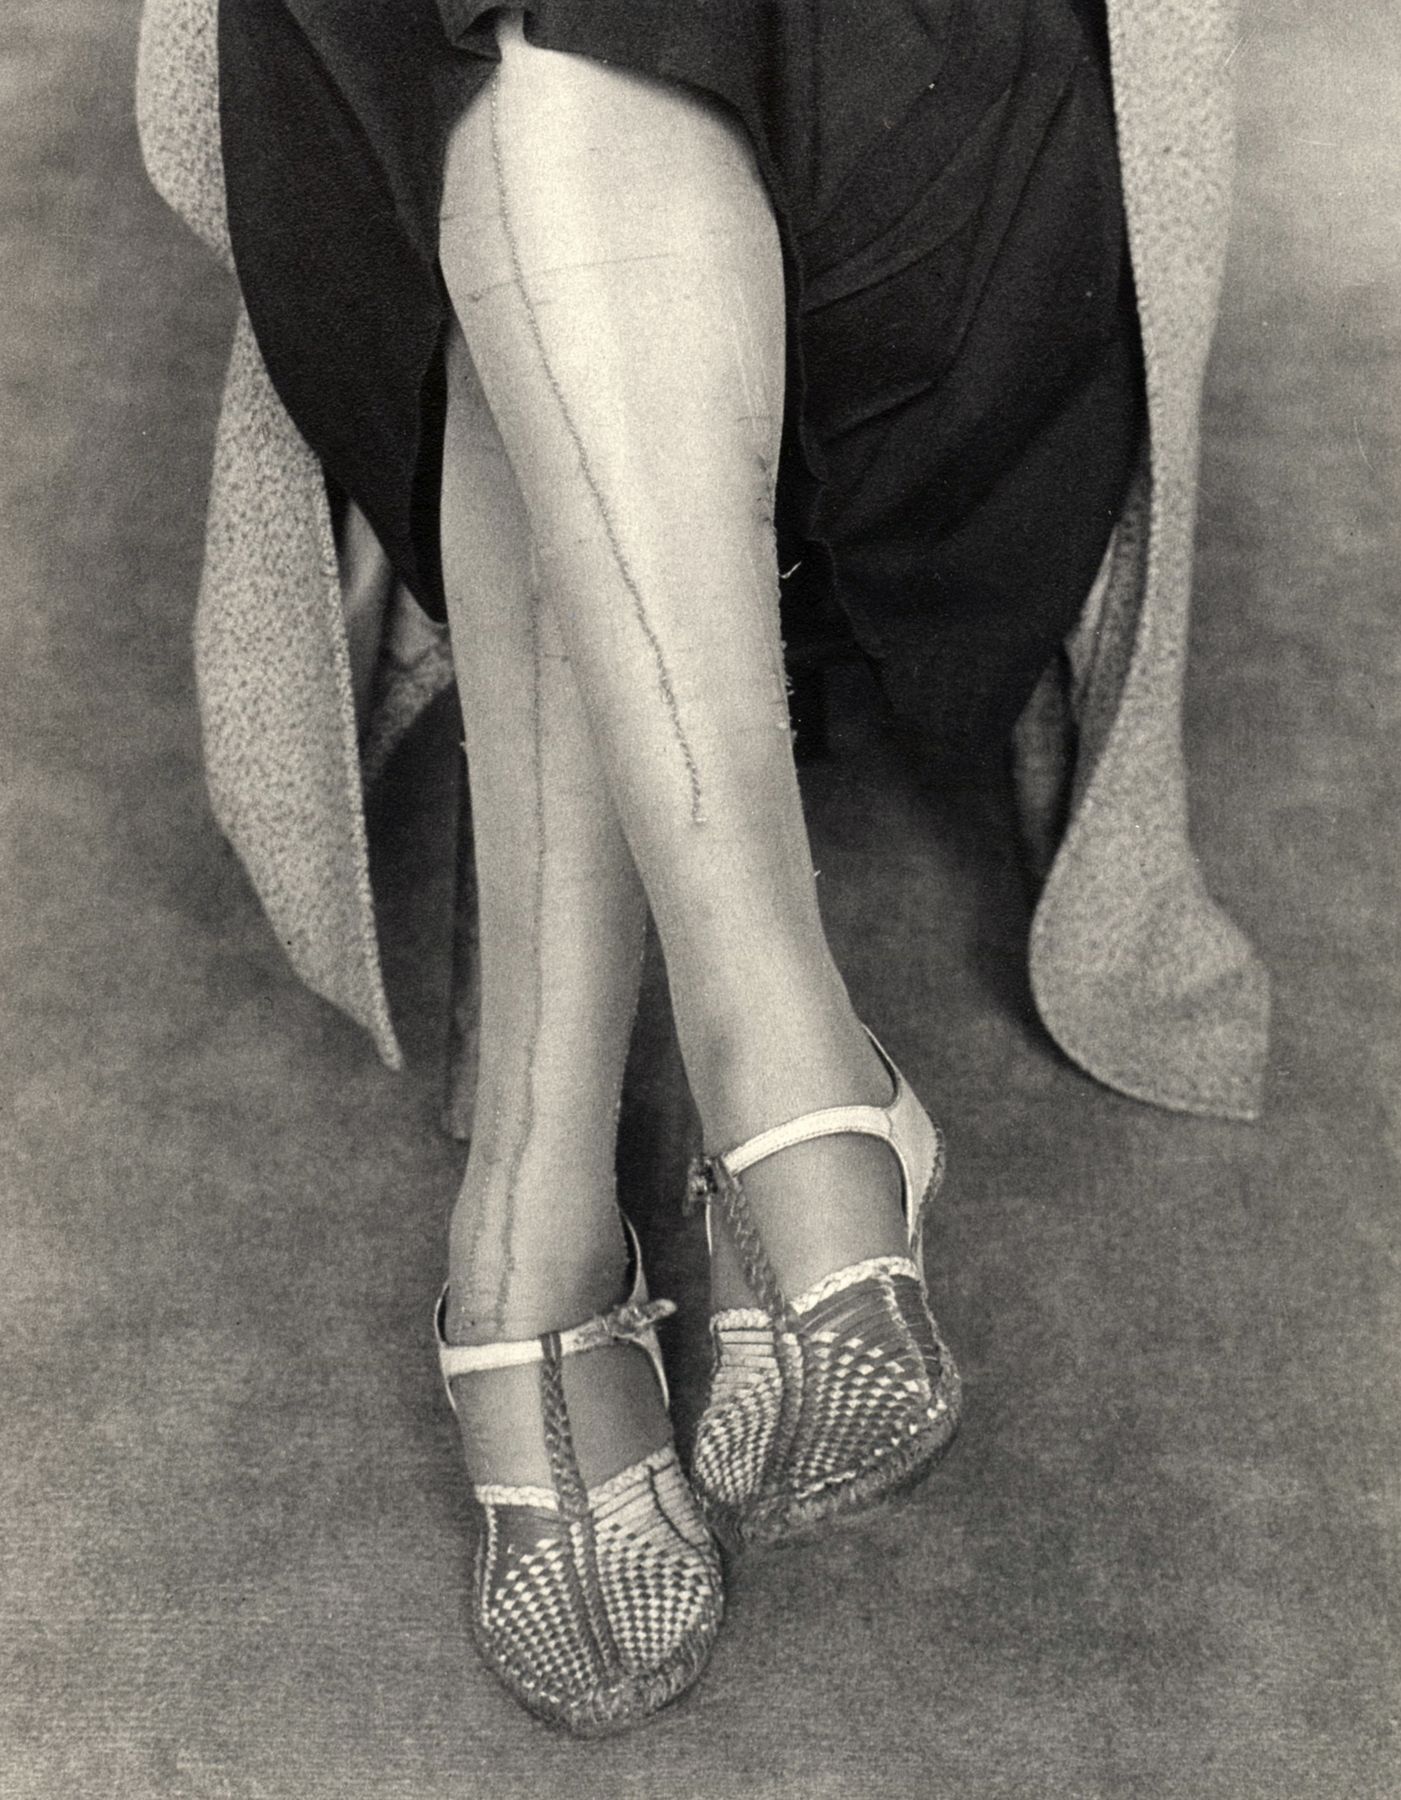 Mended Stockings, San Francisco, 1934 by Dorothea Lange